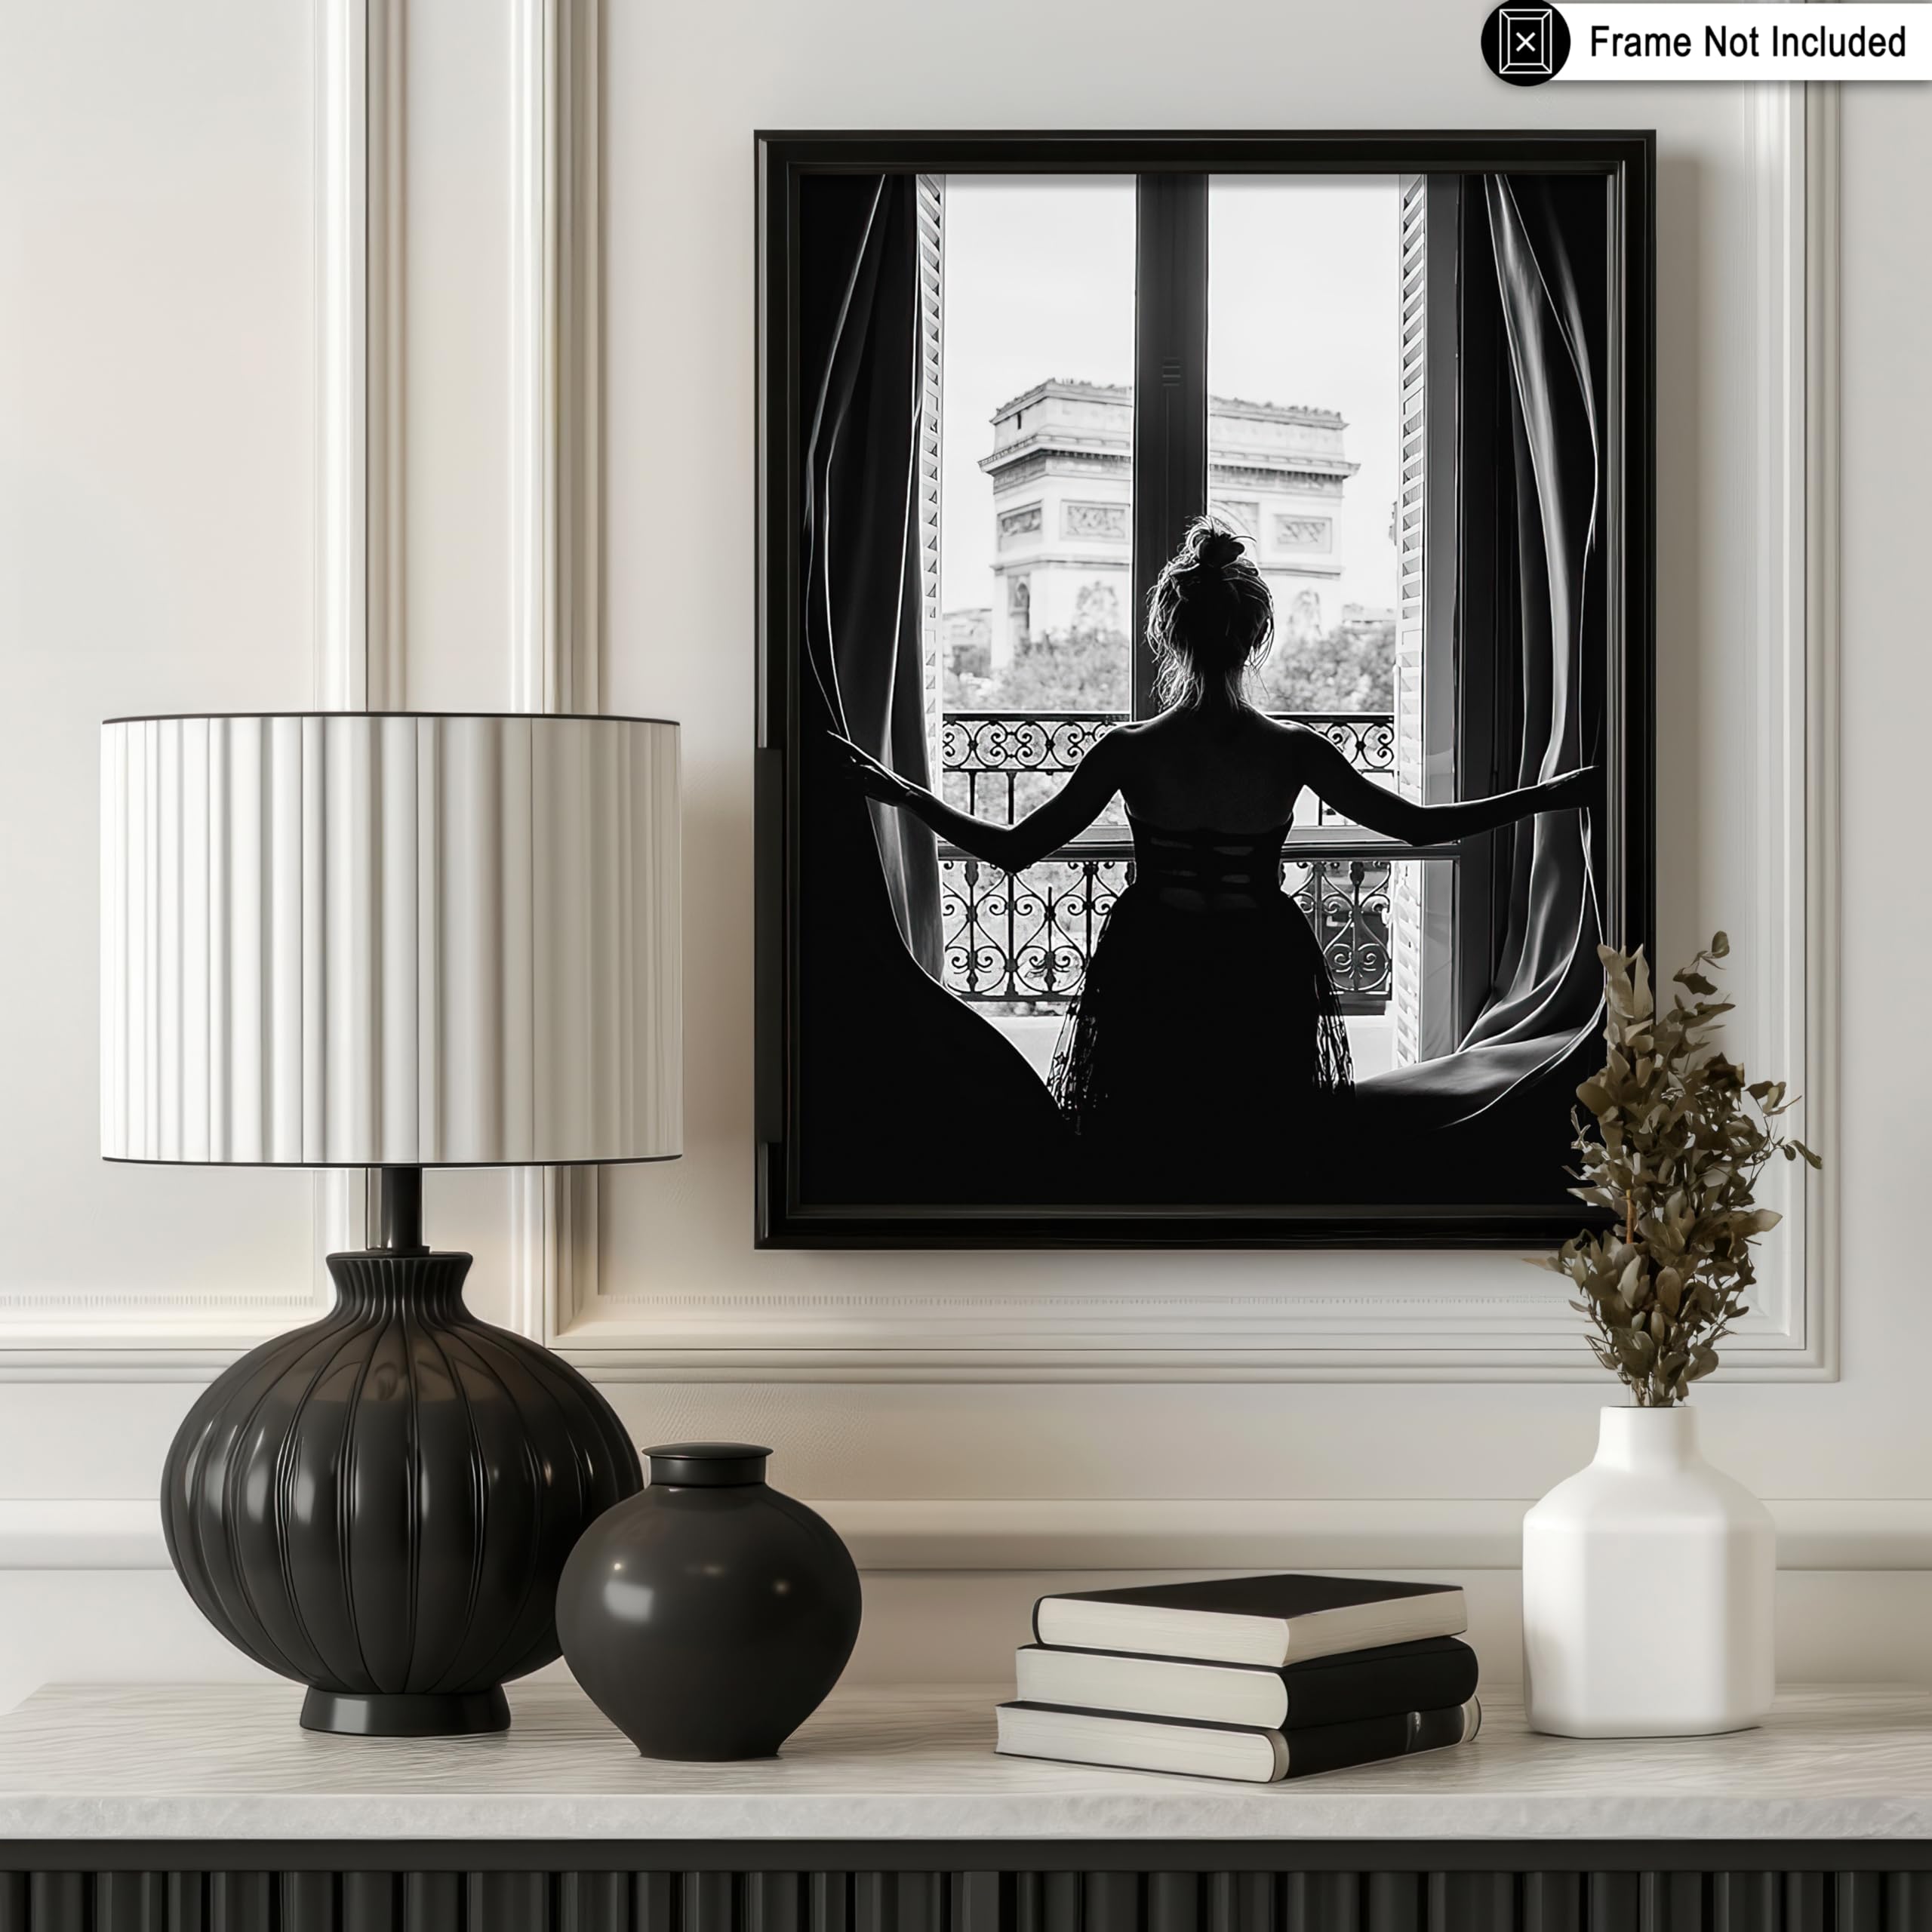 Poster Master Vintage Photograph Poster - Retro Minimalist Print - Girl In The Open Window, Black & White, Simple - 8x10 UNFRAMED Wall Art - Gift for Artist, Friend - Wall Decor for Living Room, Dorm